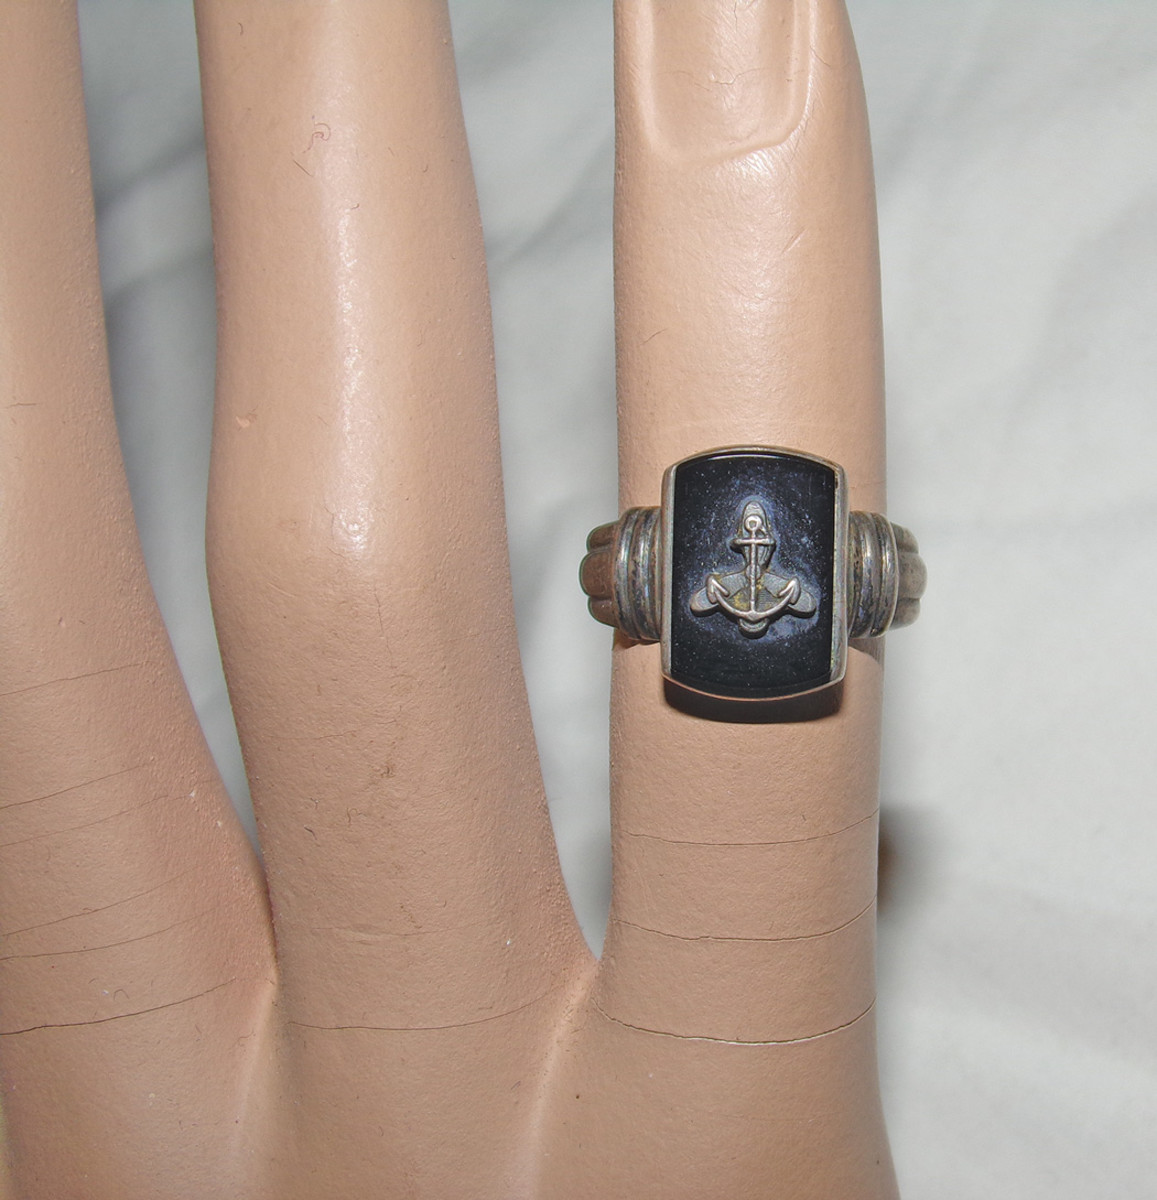 Beautiful gold and silver rings could be purchased by WAVEs to show their affiliation with the service. Both of these have the distinctive anchor over propeller insignia.